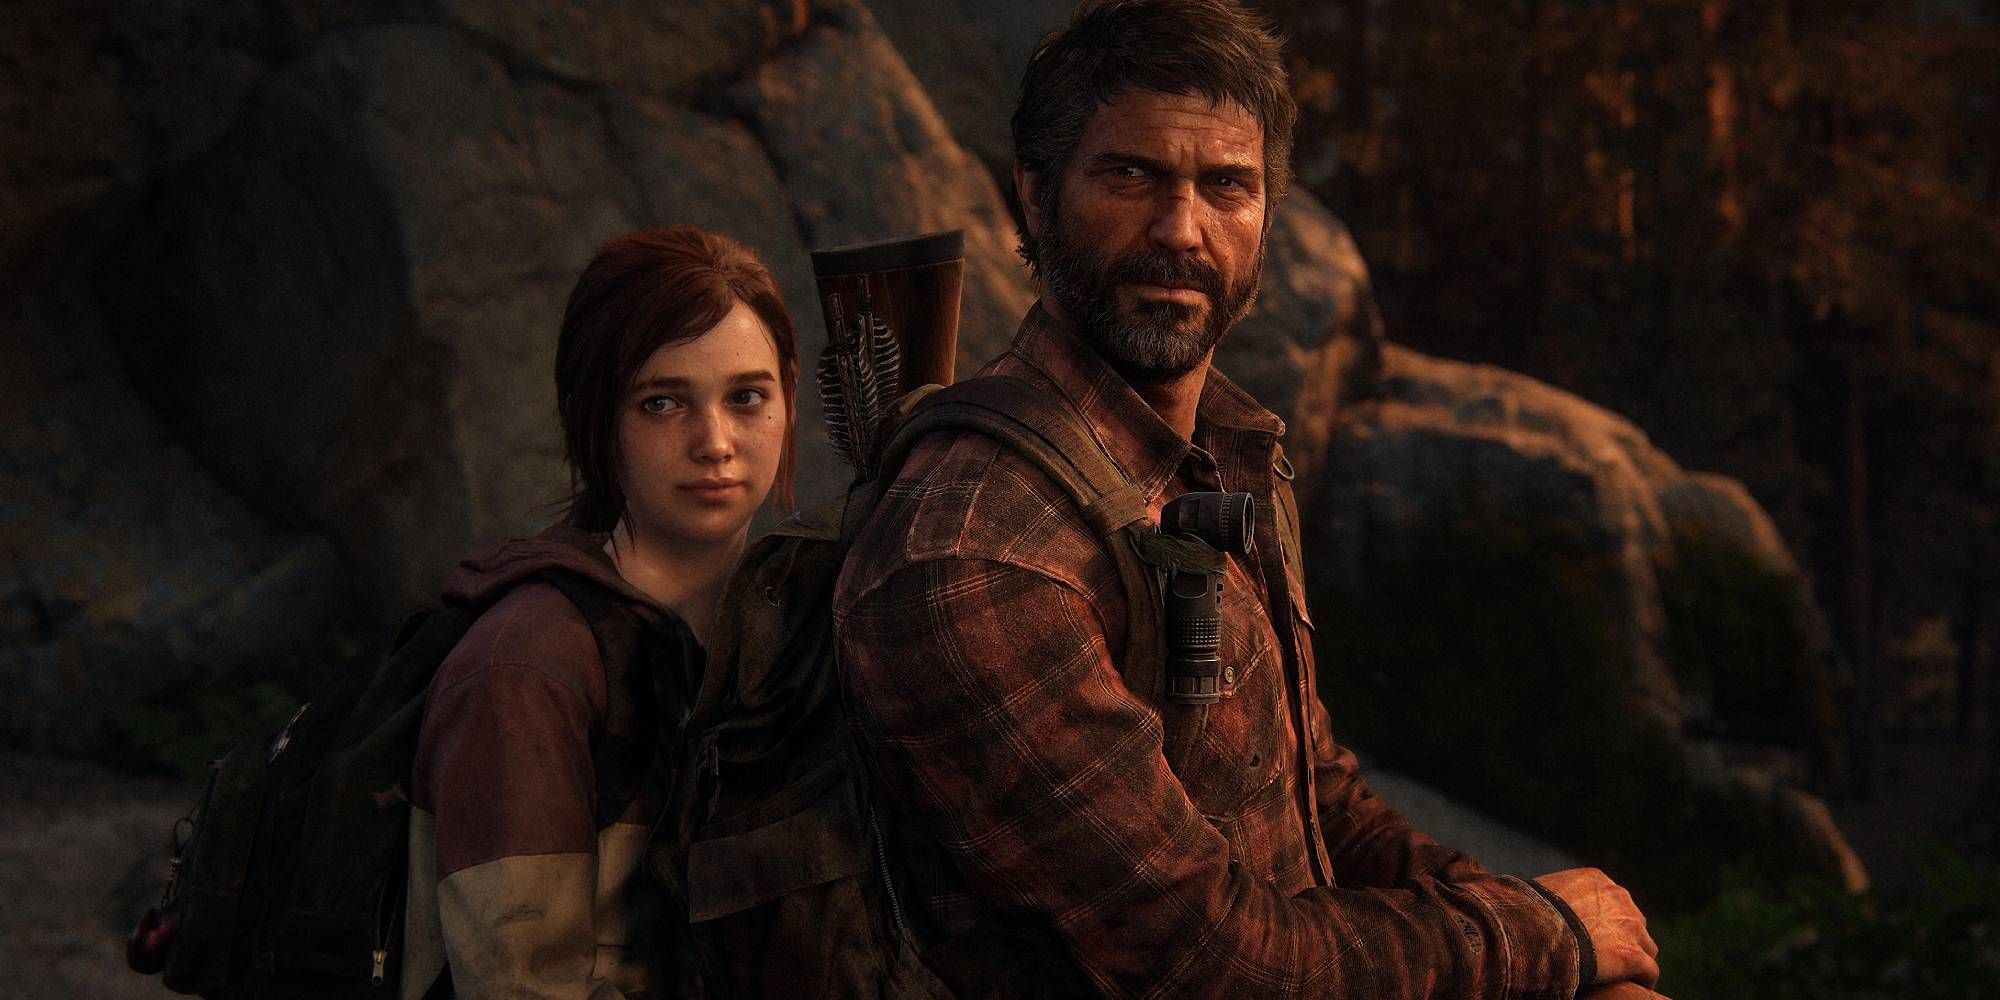 Joel and Ellie from The Last of Us sitting on horses